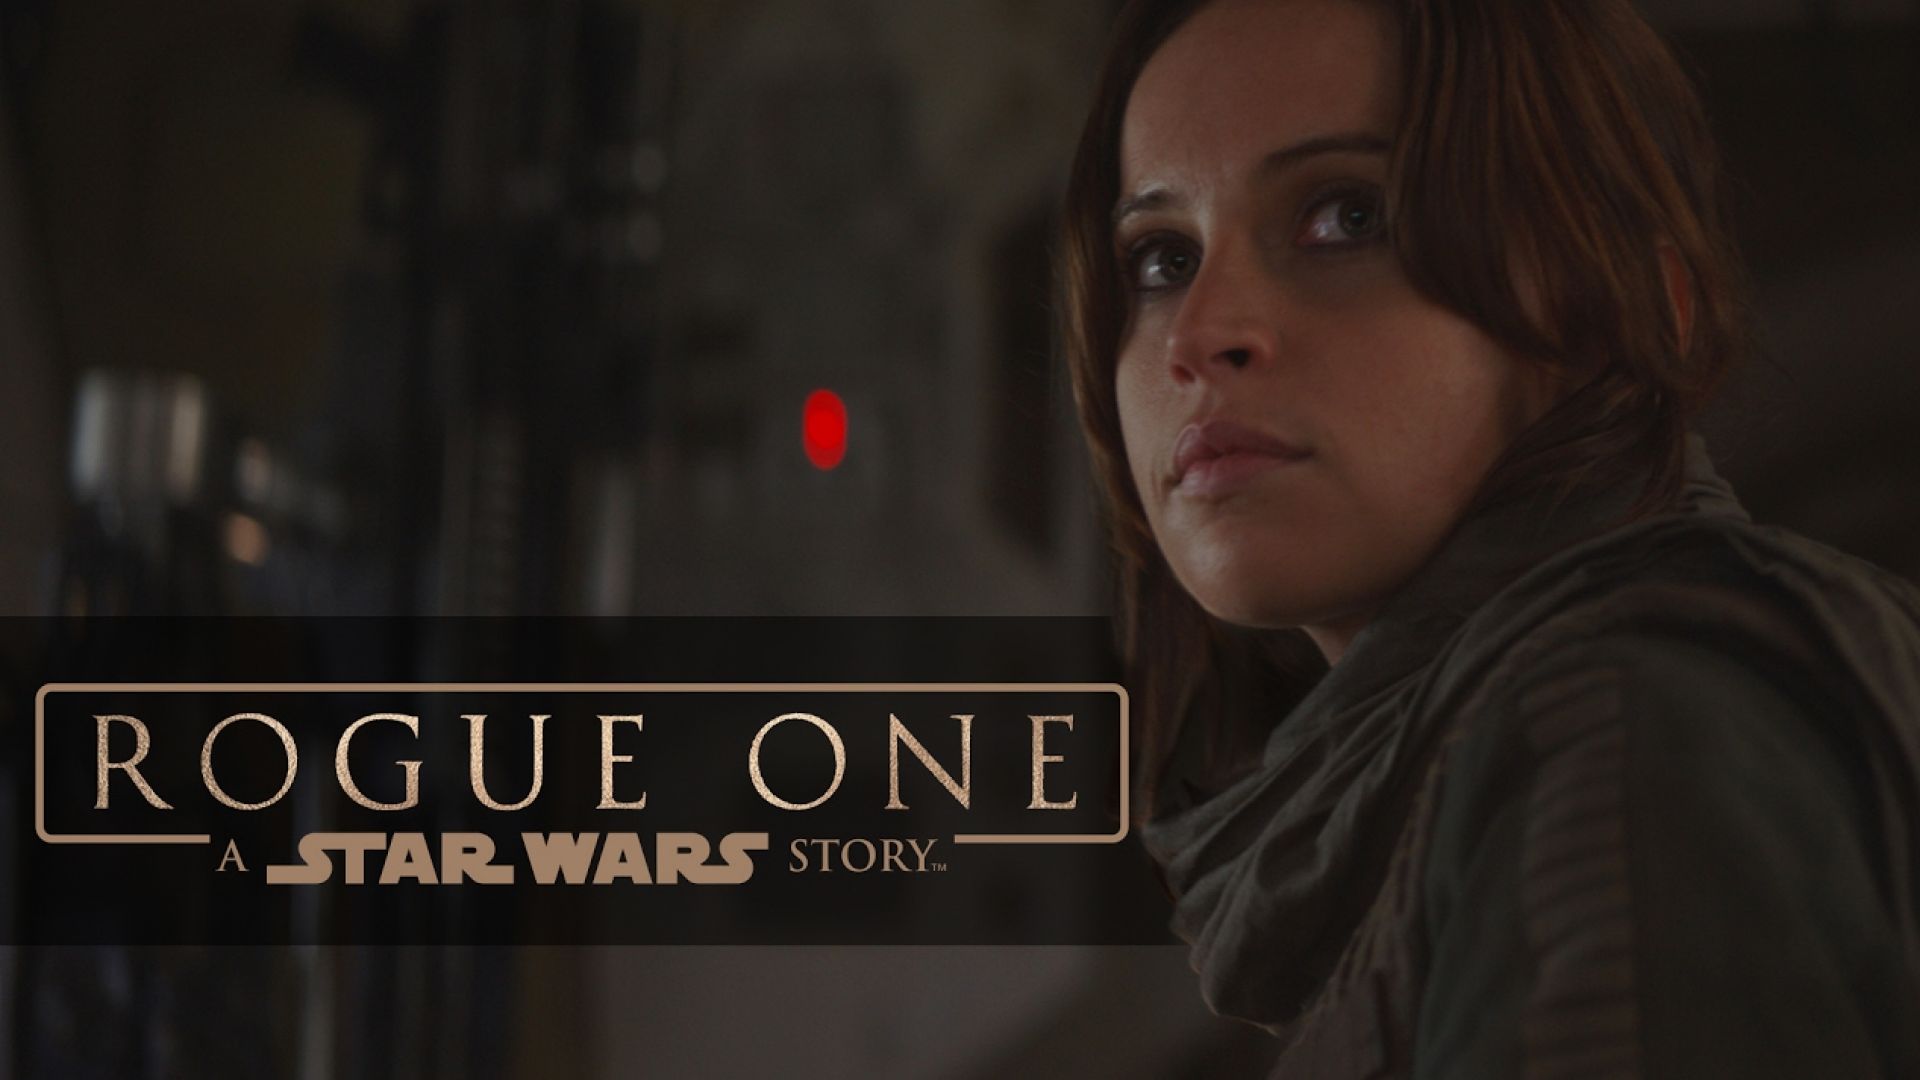 Rogue One hits shelves on April 4; check out the Blu-ray tra